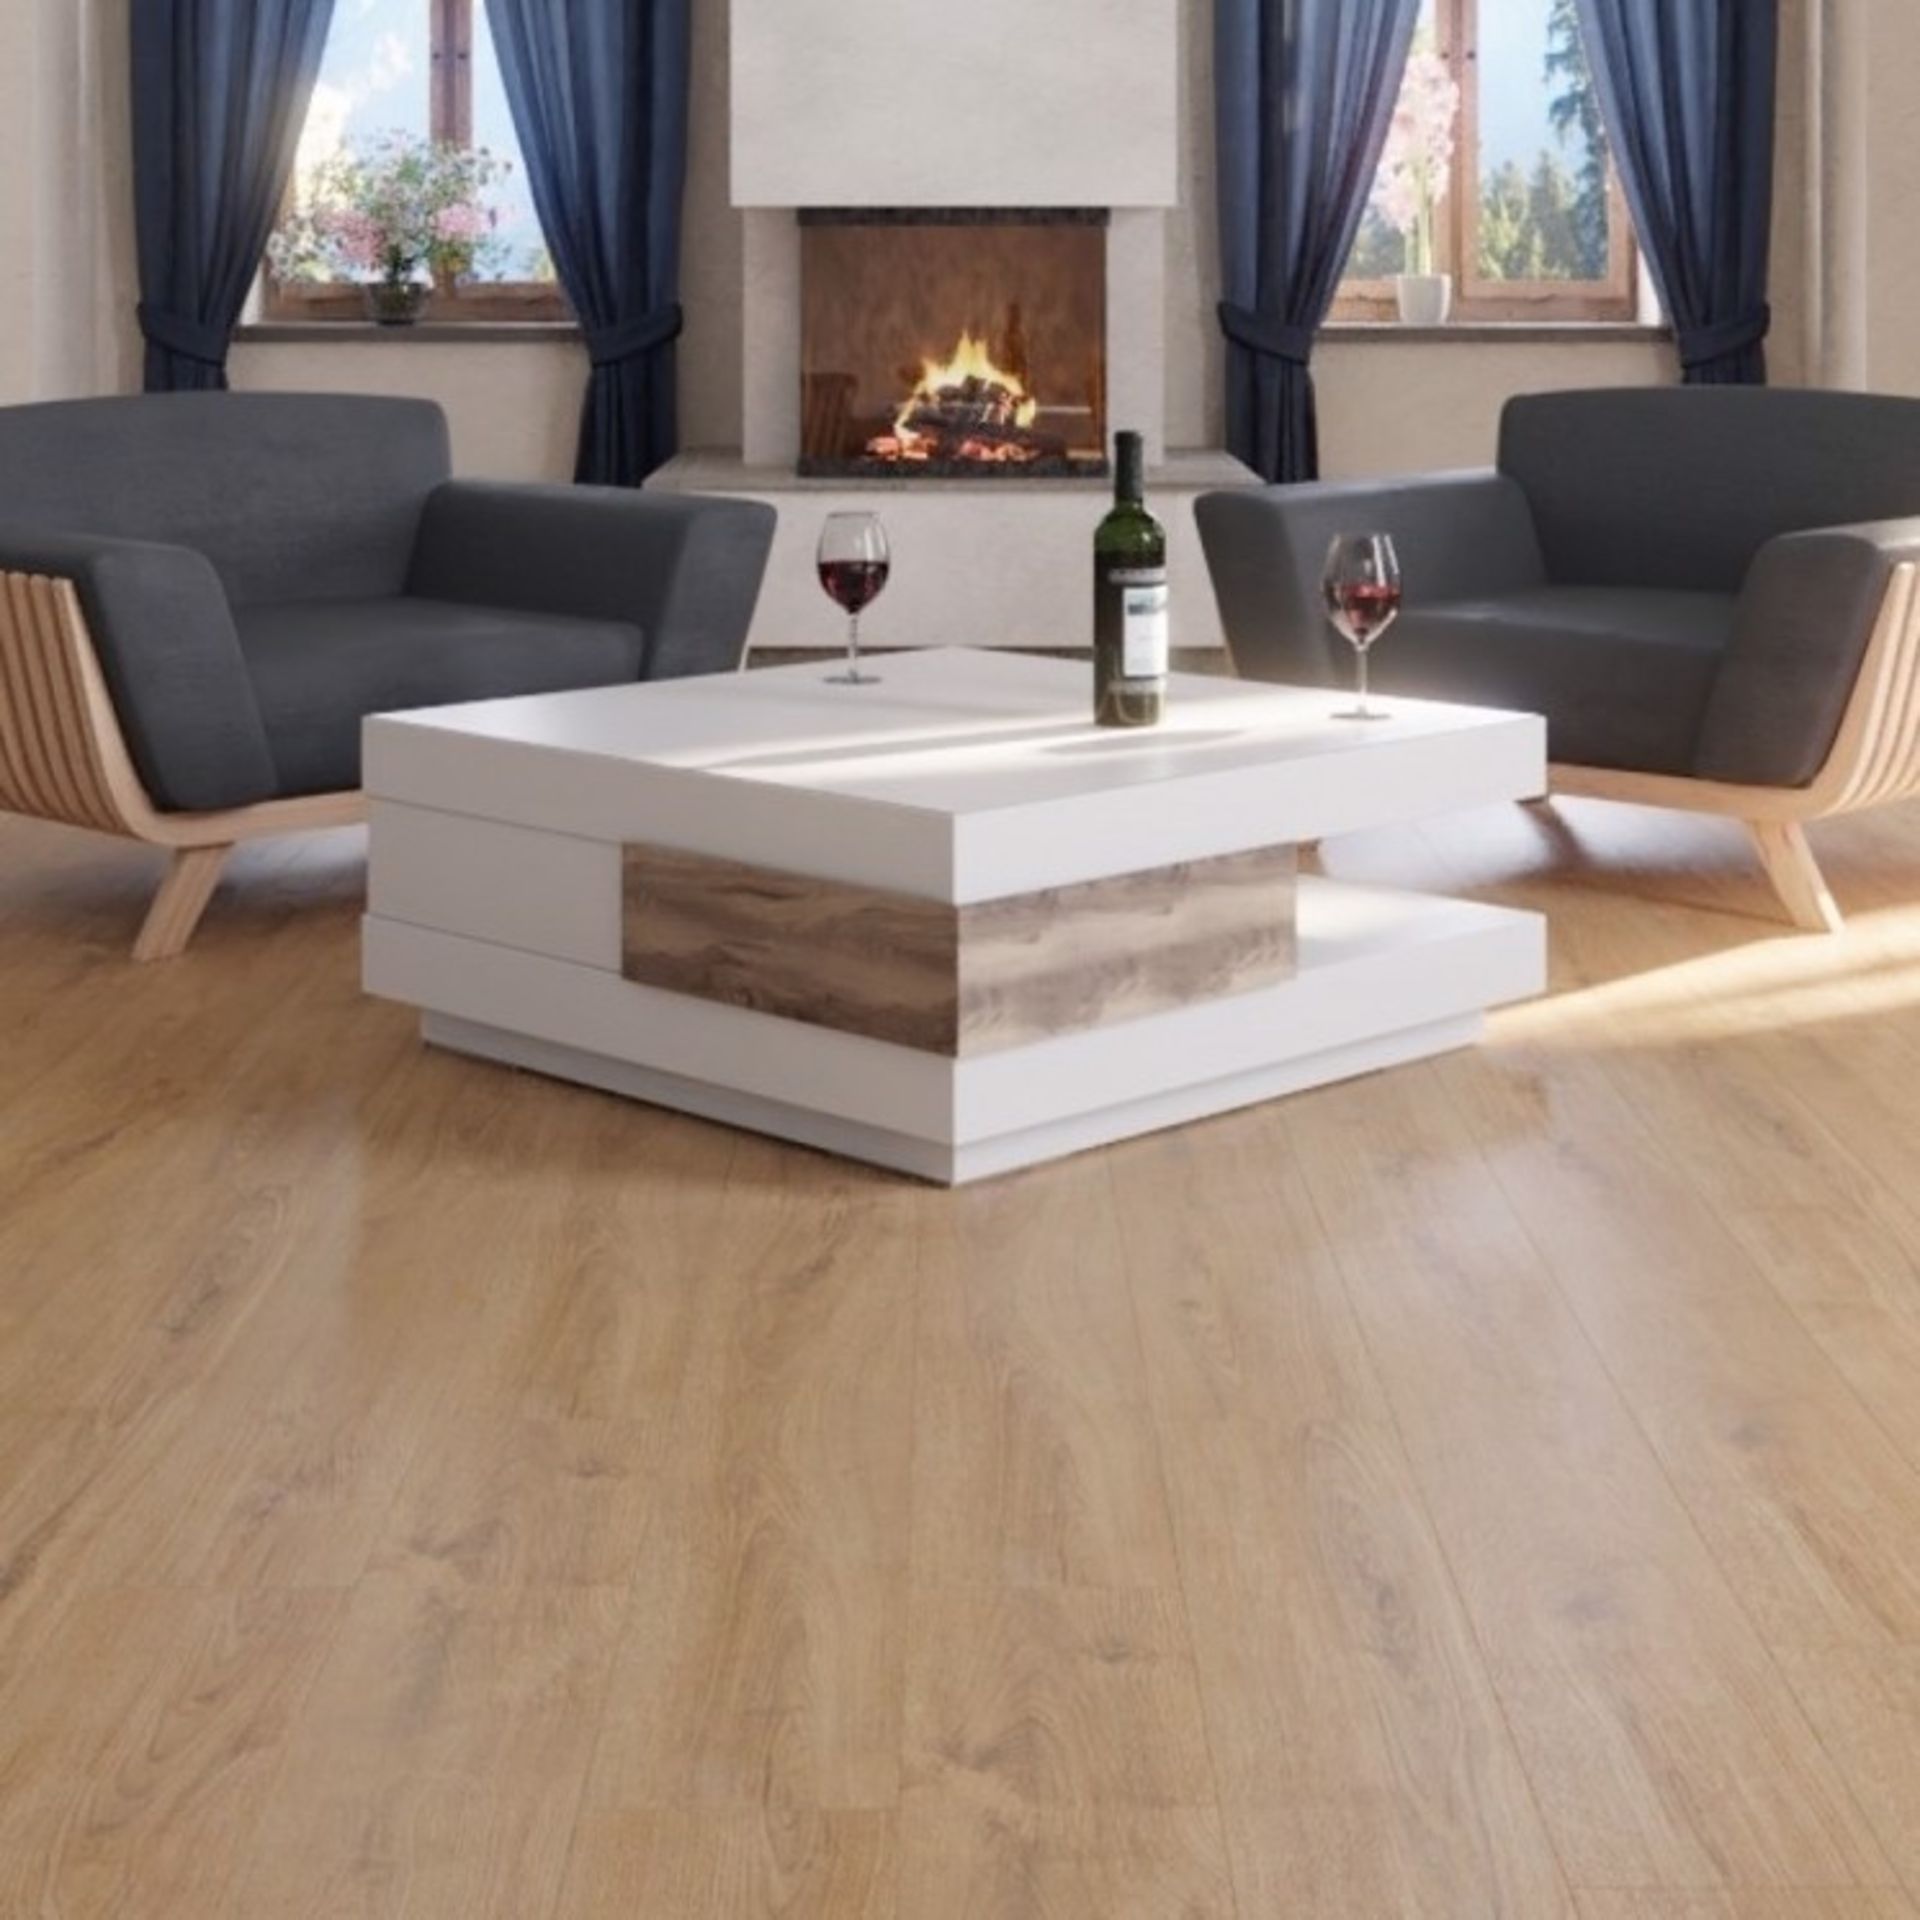 NEW 7.17 Square Meters of LAMINATE FLOORING SUMMER NATURAL OAK. With a warming natural oak tone...